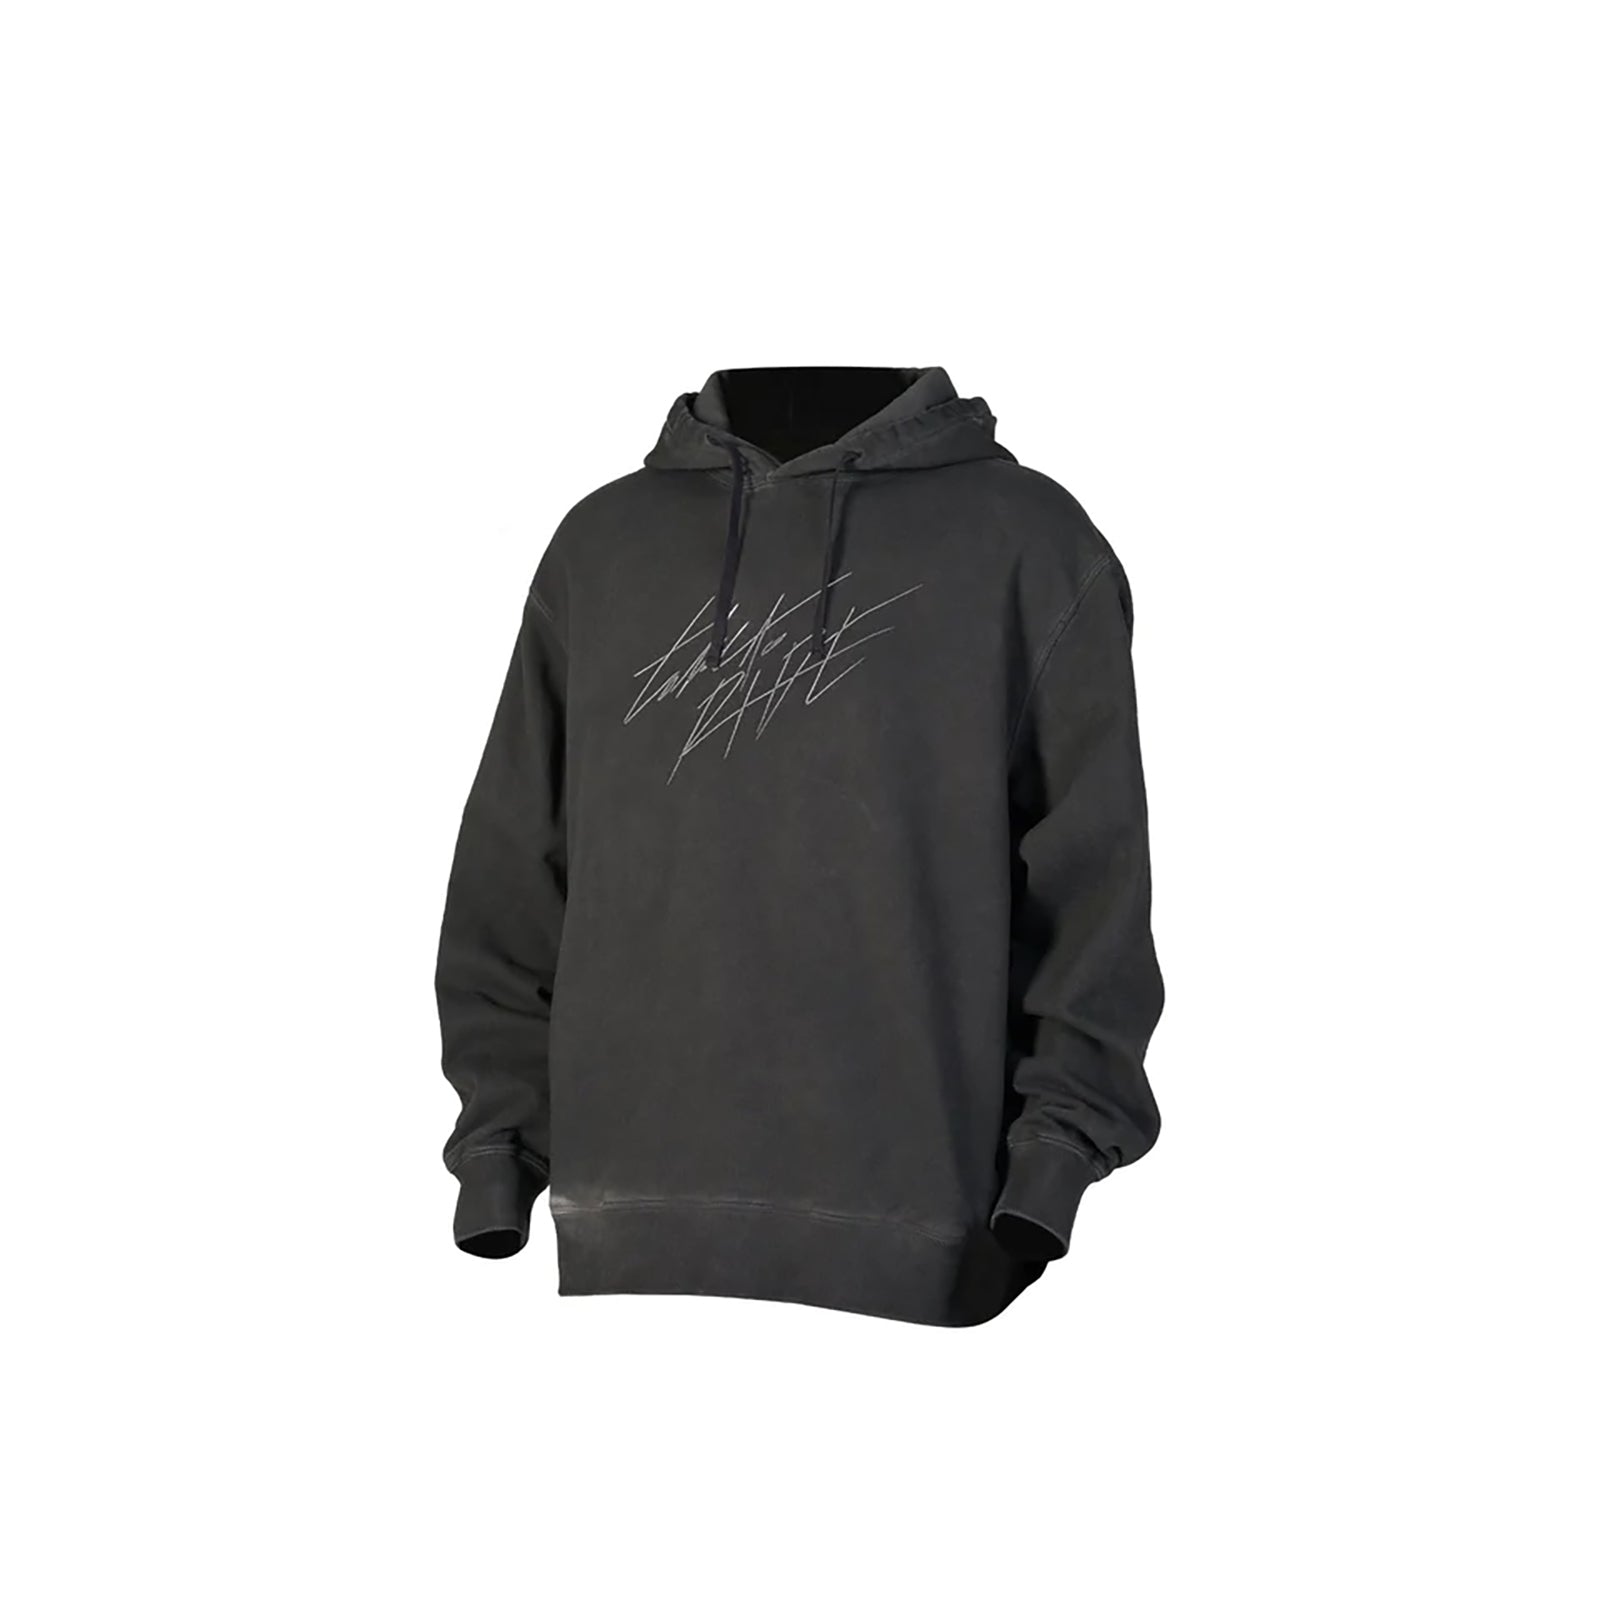 "Take A Ride" Embroider Hoodie